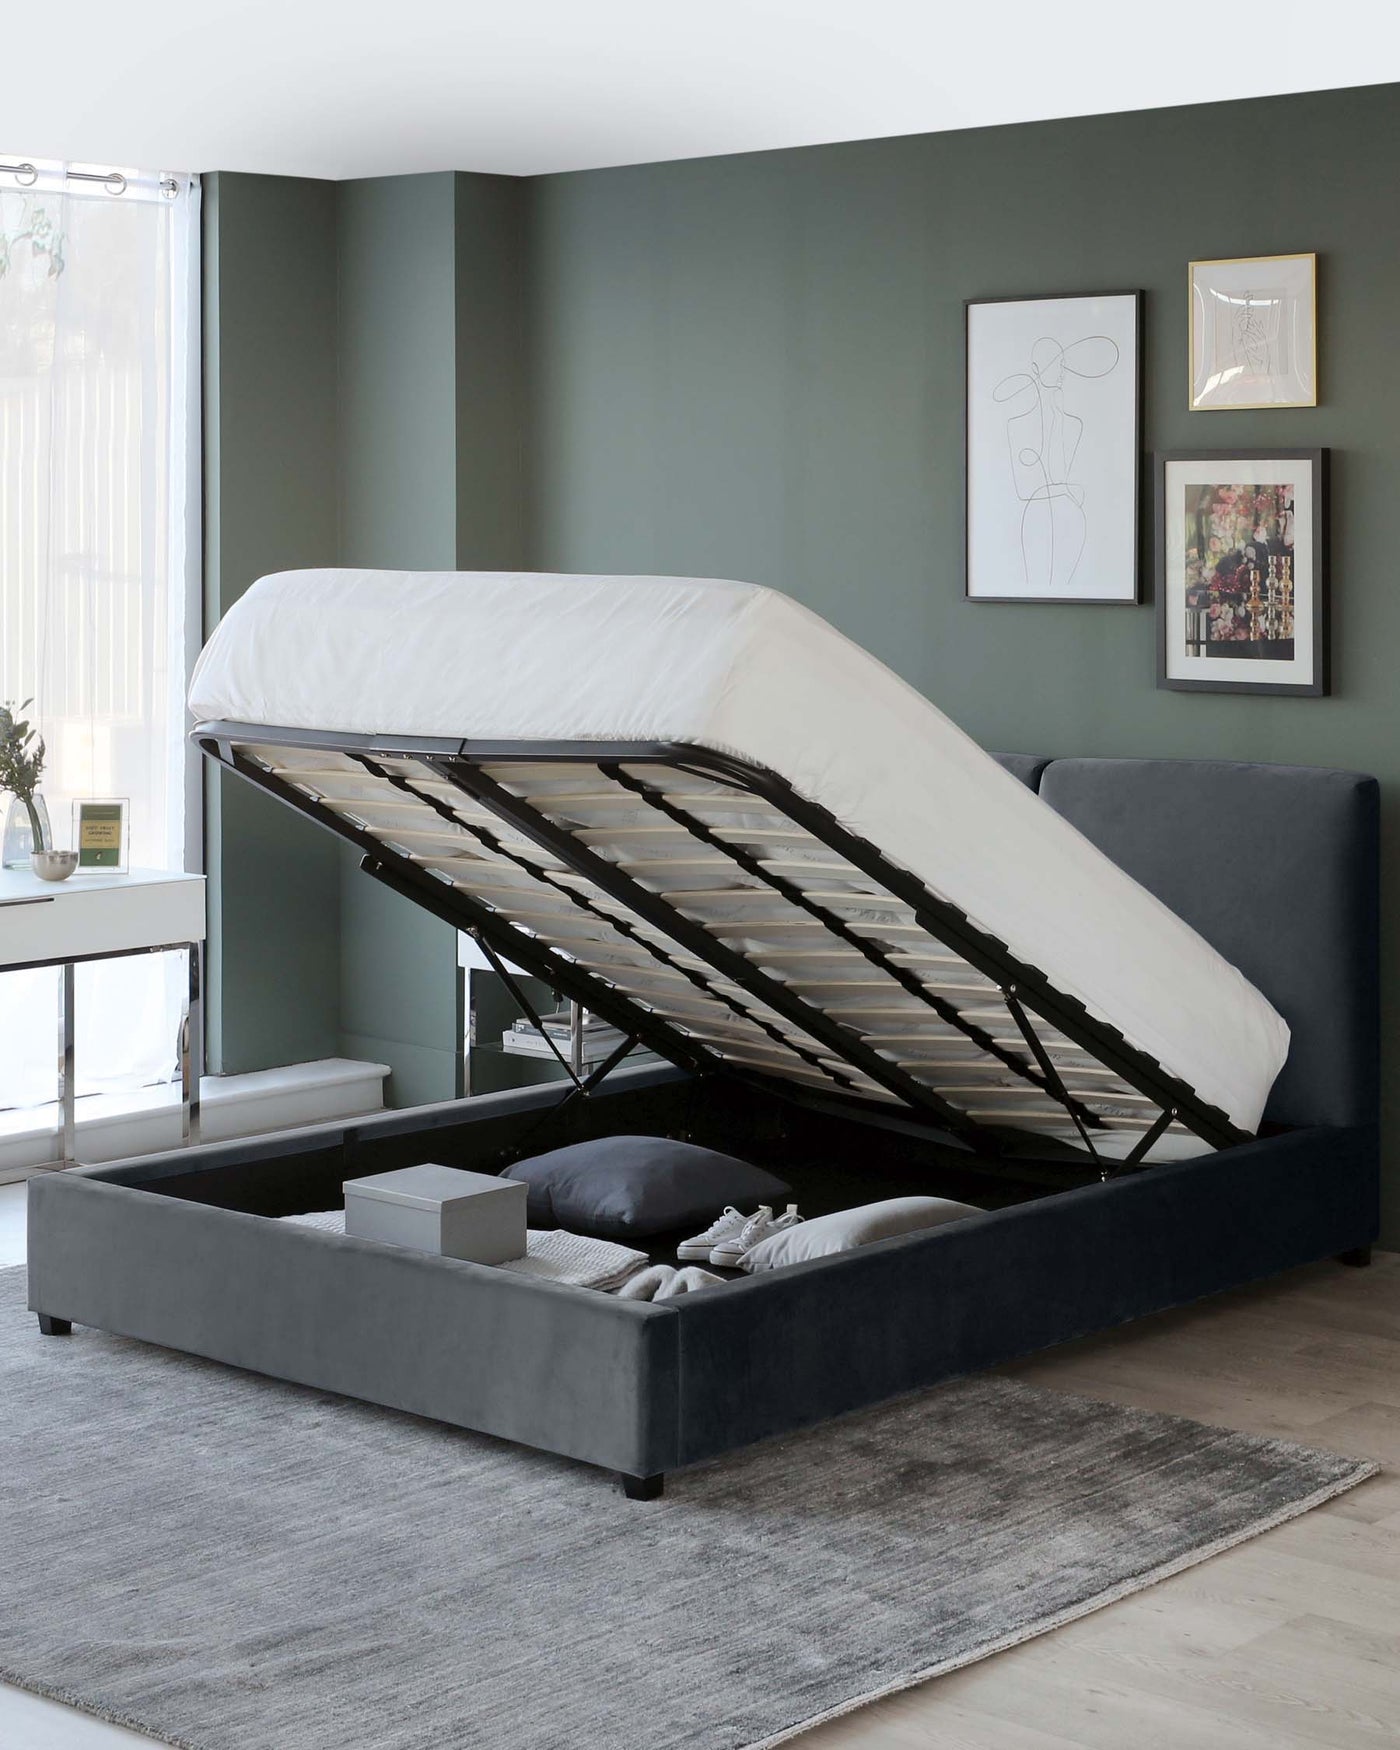 A contemporary grey upholstered storage bed with an open lift-up frame revealing a spacious under-bed storage compartment, set on a large grey area rug. The bed is partially covered with a white fitted sheet, and various bedding items are stored beneath. The room exhibits a modern aesthetic with muted green walls and framed artwork.